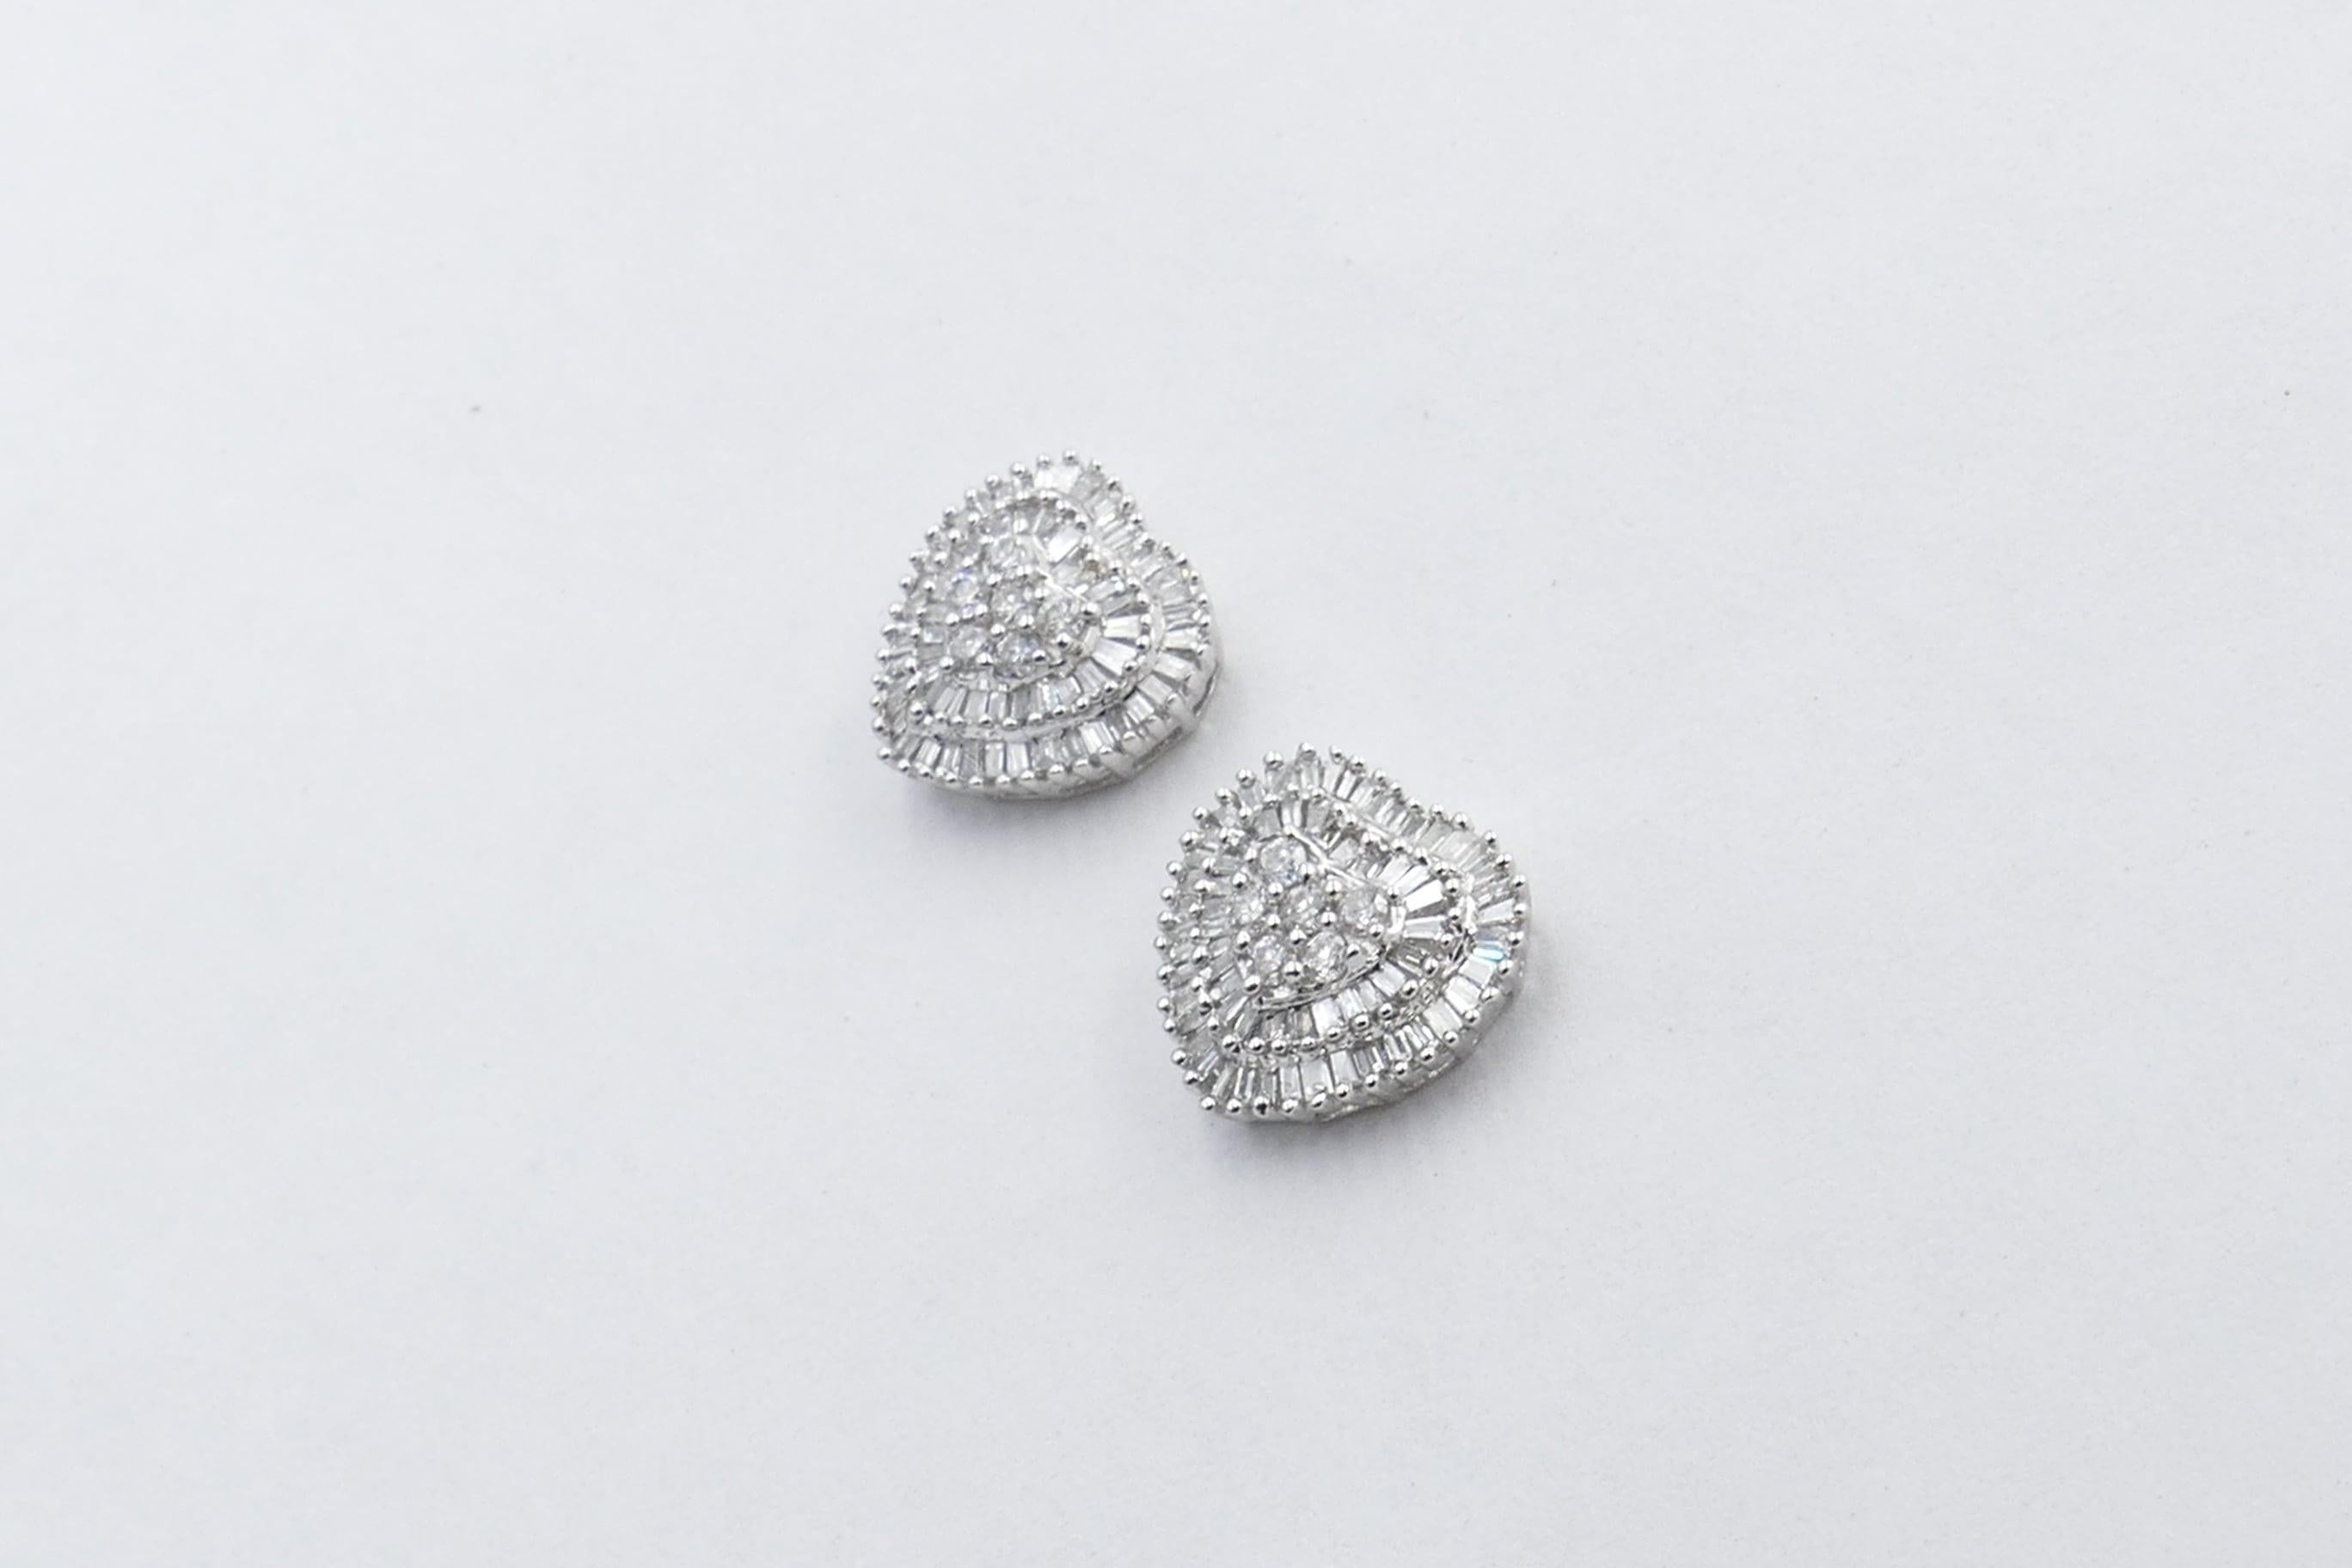 How pretty are these Diamond Hearts.
They have very good quality Diamonds G/H Colour in a combination of round brilliant & baguette cuts and the combined weight is 1 carat. 
They sit beautifully on the ear, are very light to wear and of a really